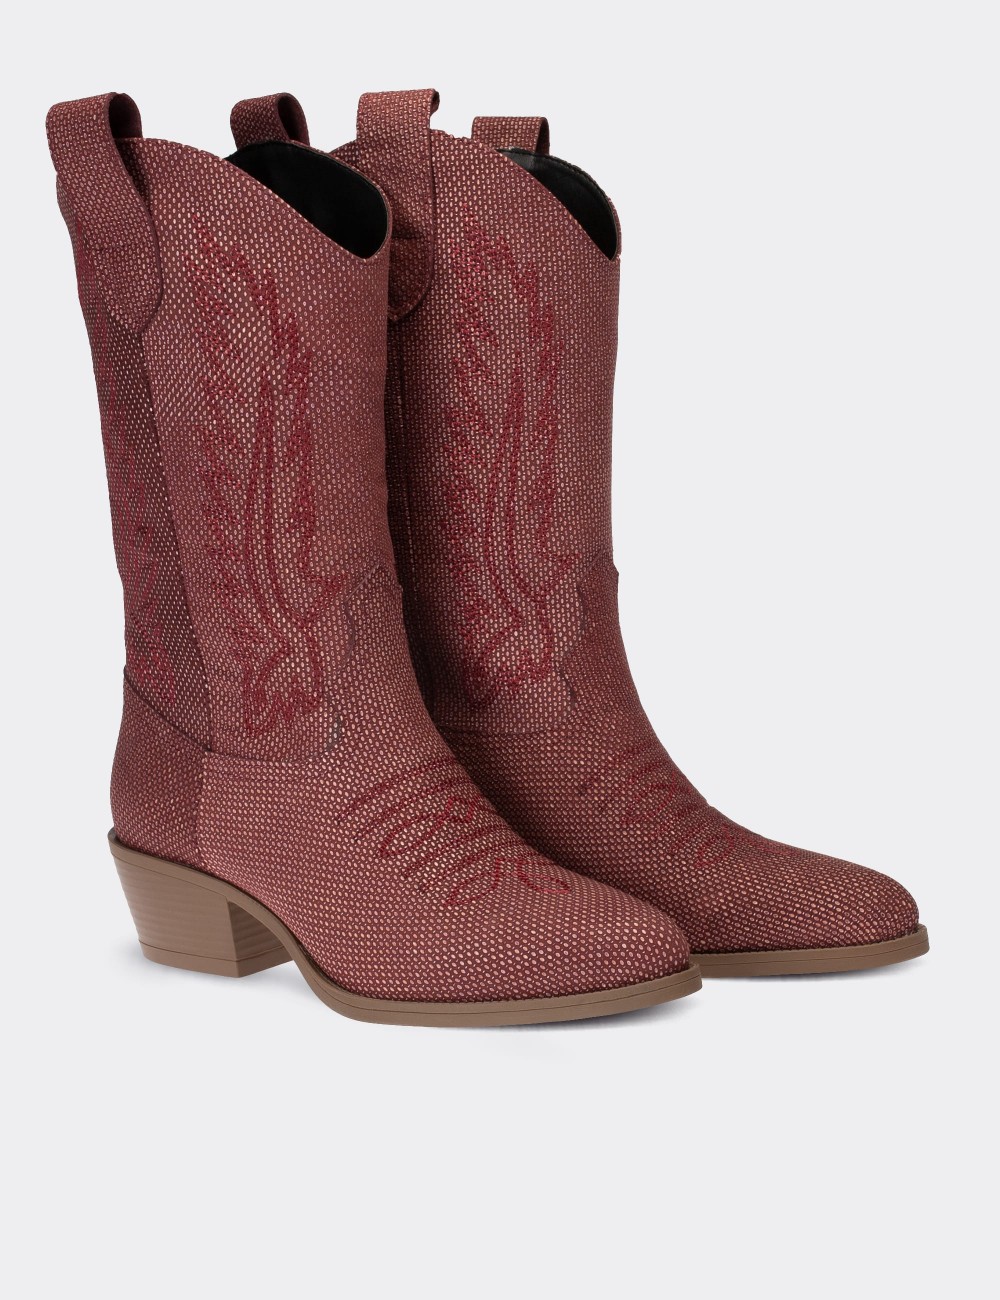 Burgundy Suede Leather  Boots - E8002ZBRDC01